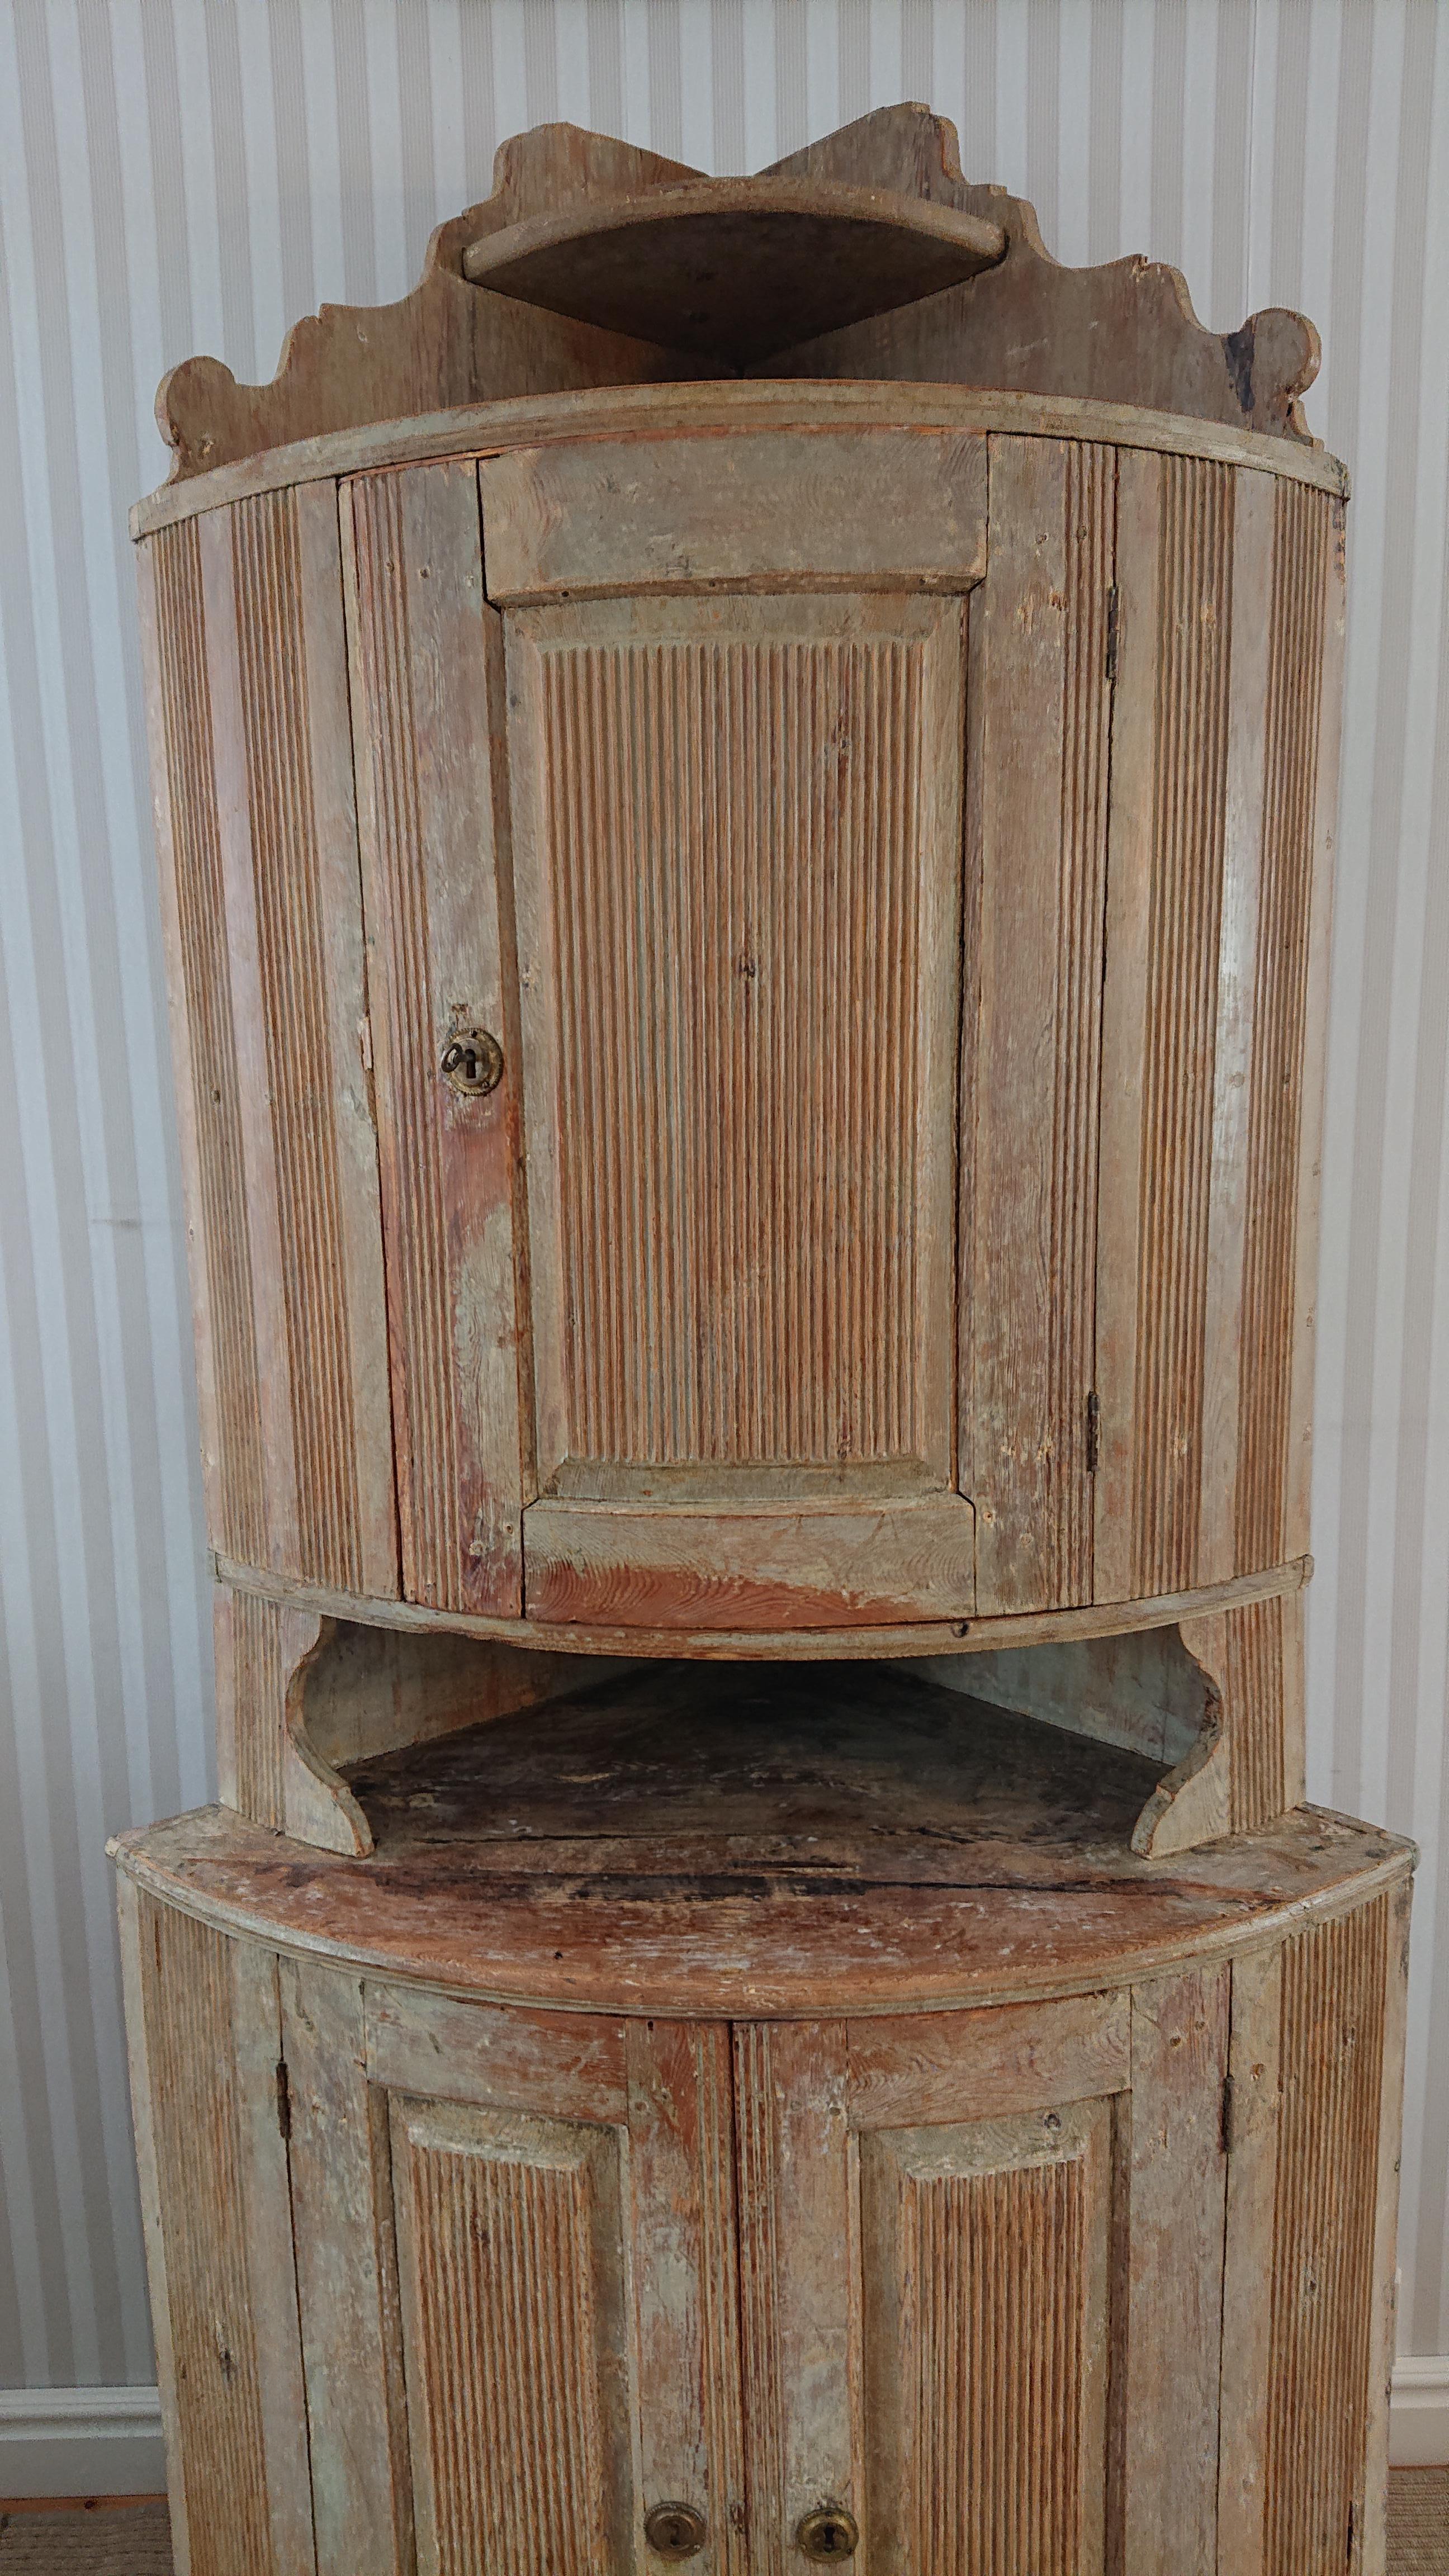 Hand-Carved 18th Century Swedish Gustavian Corner Cabinet with Original Paint & Reeded Doors